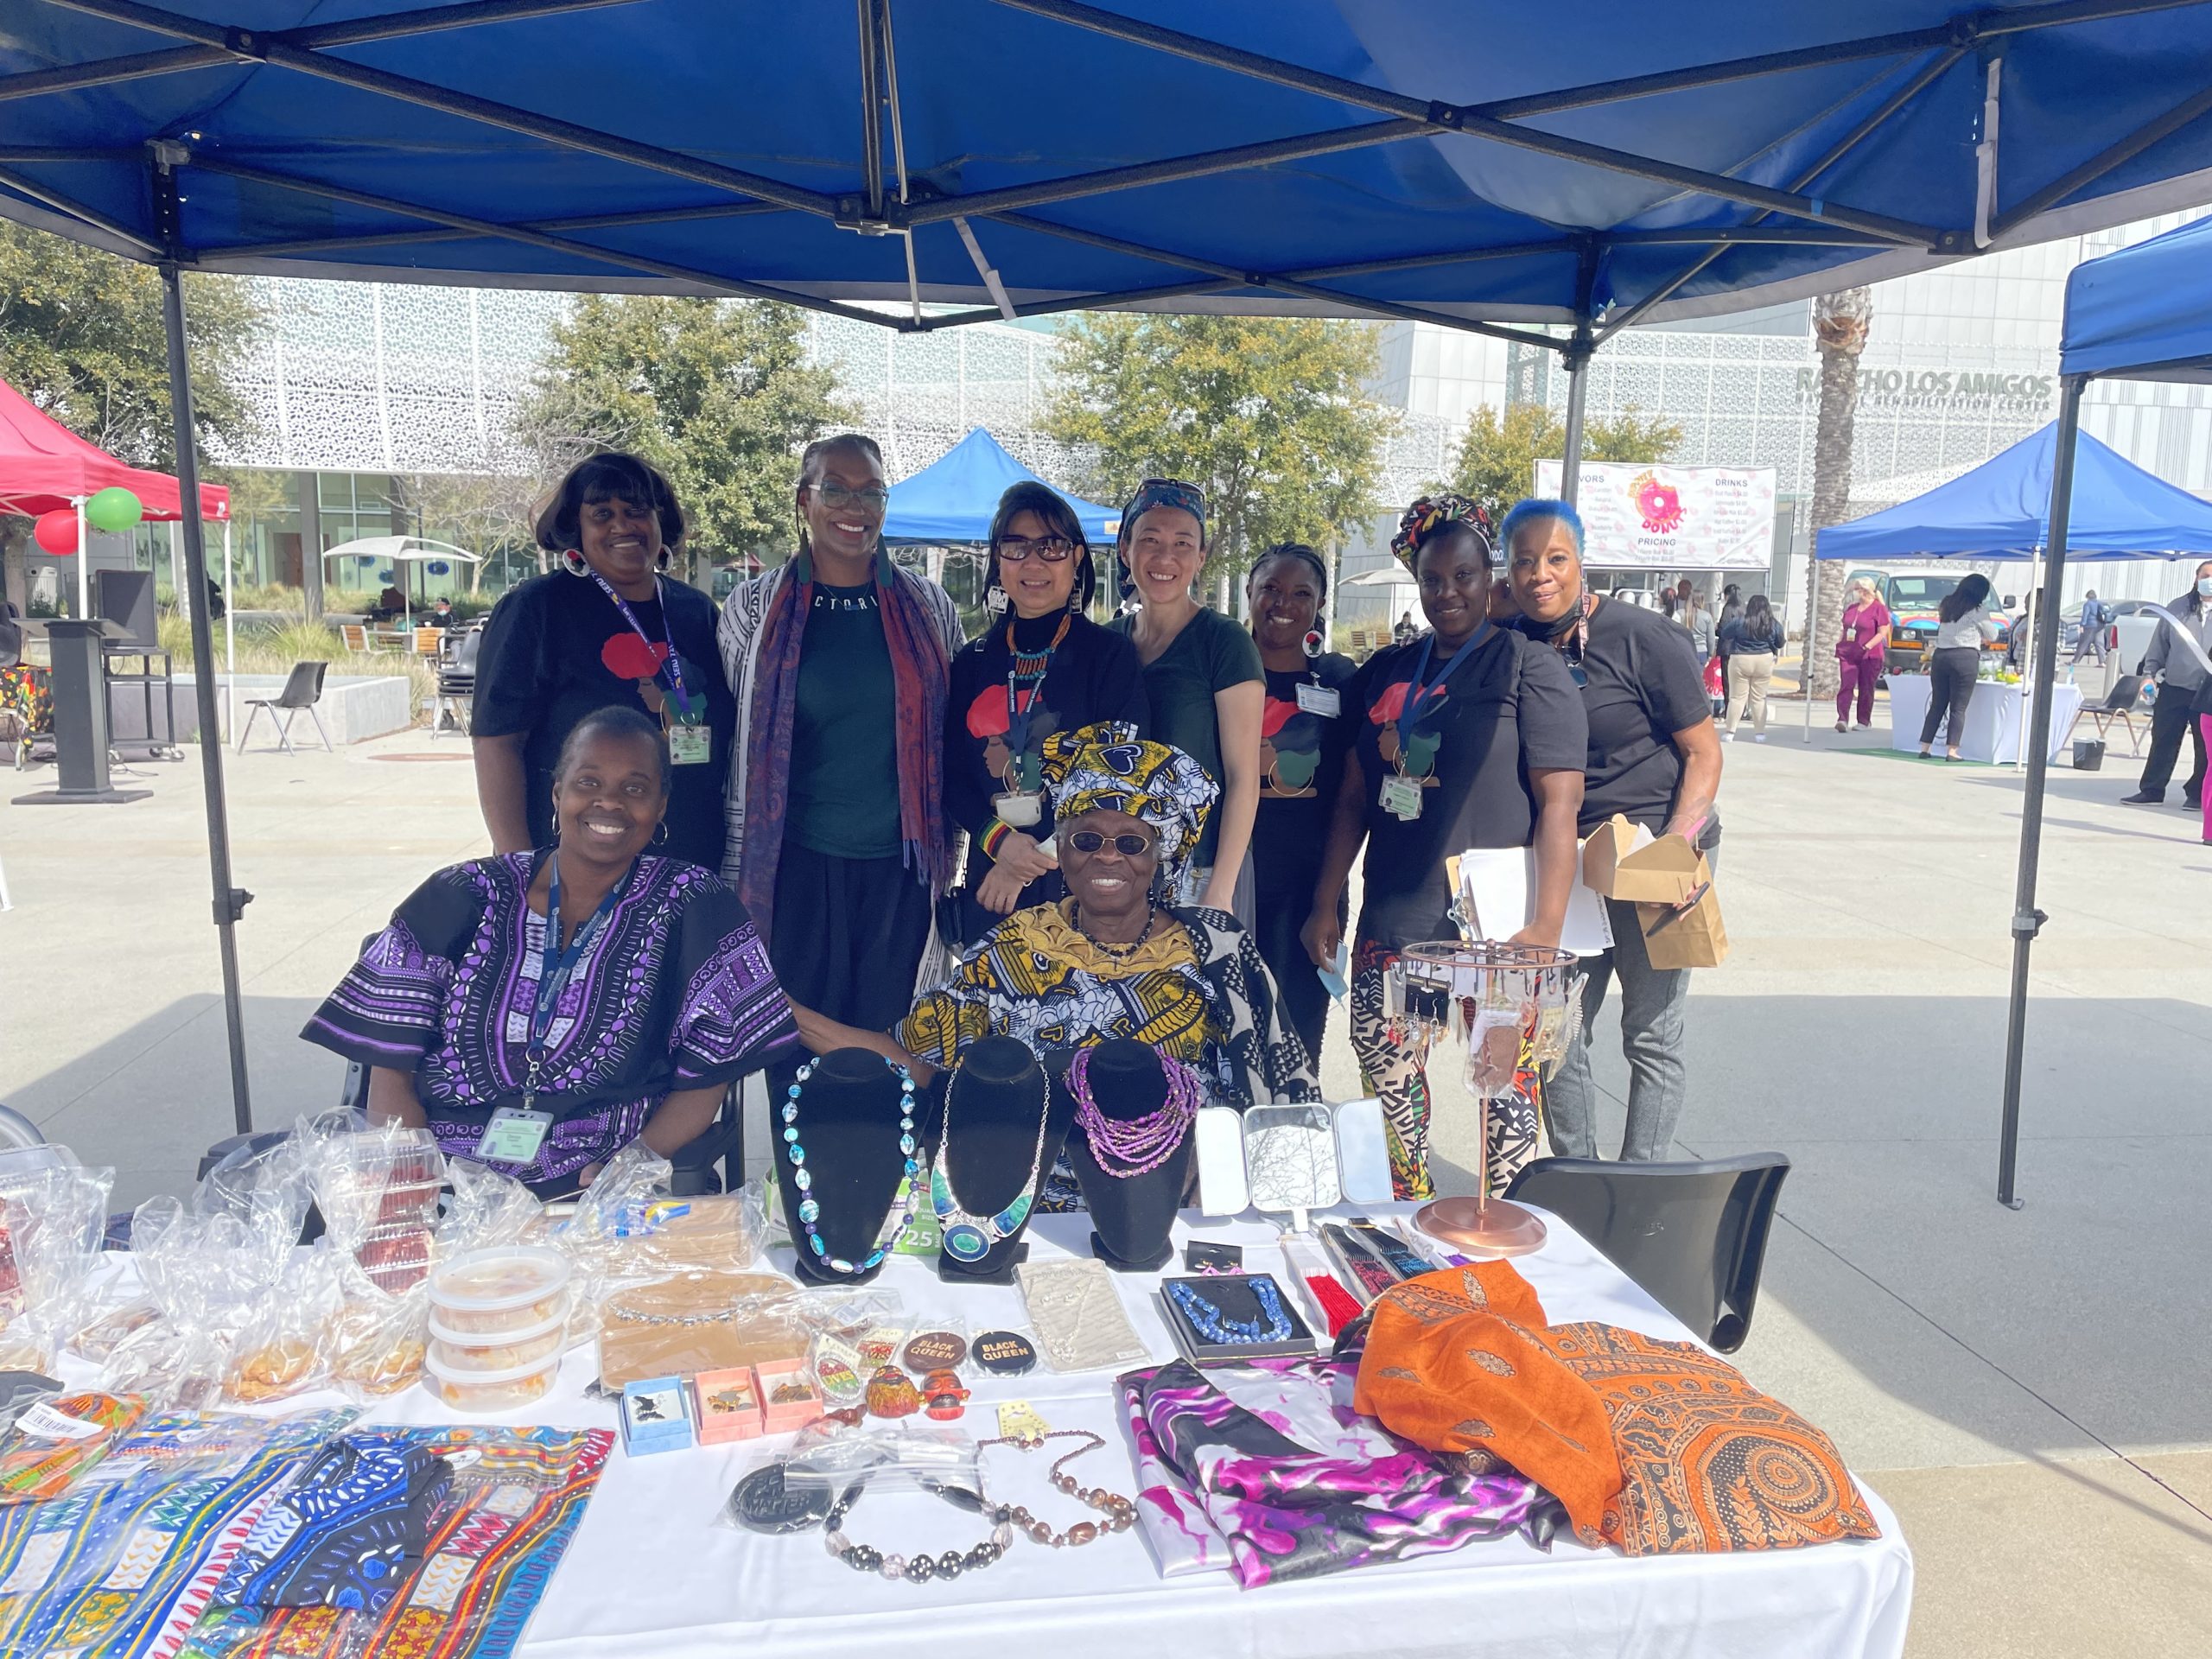 RLANRC Black History Month event - jewelry booth